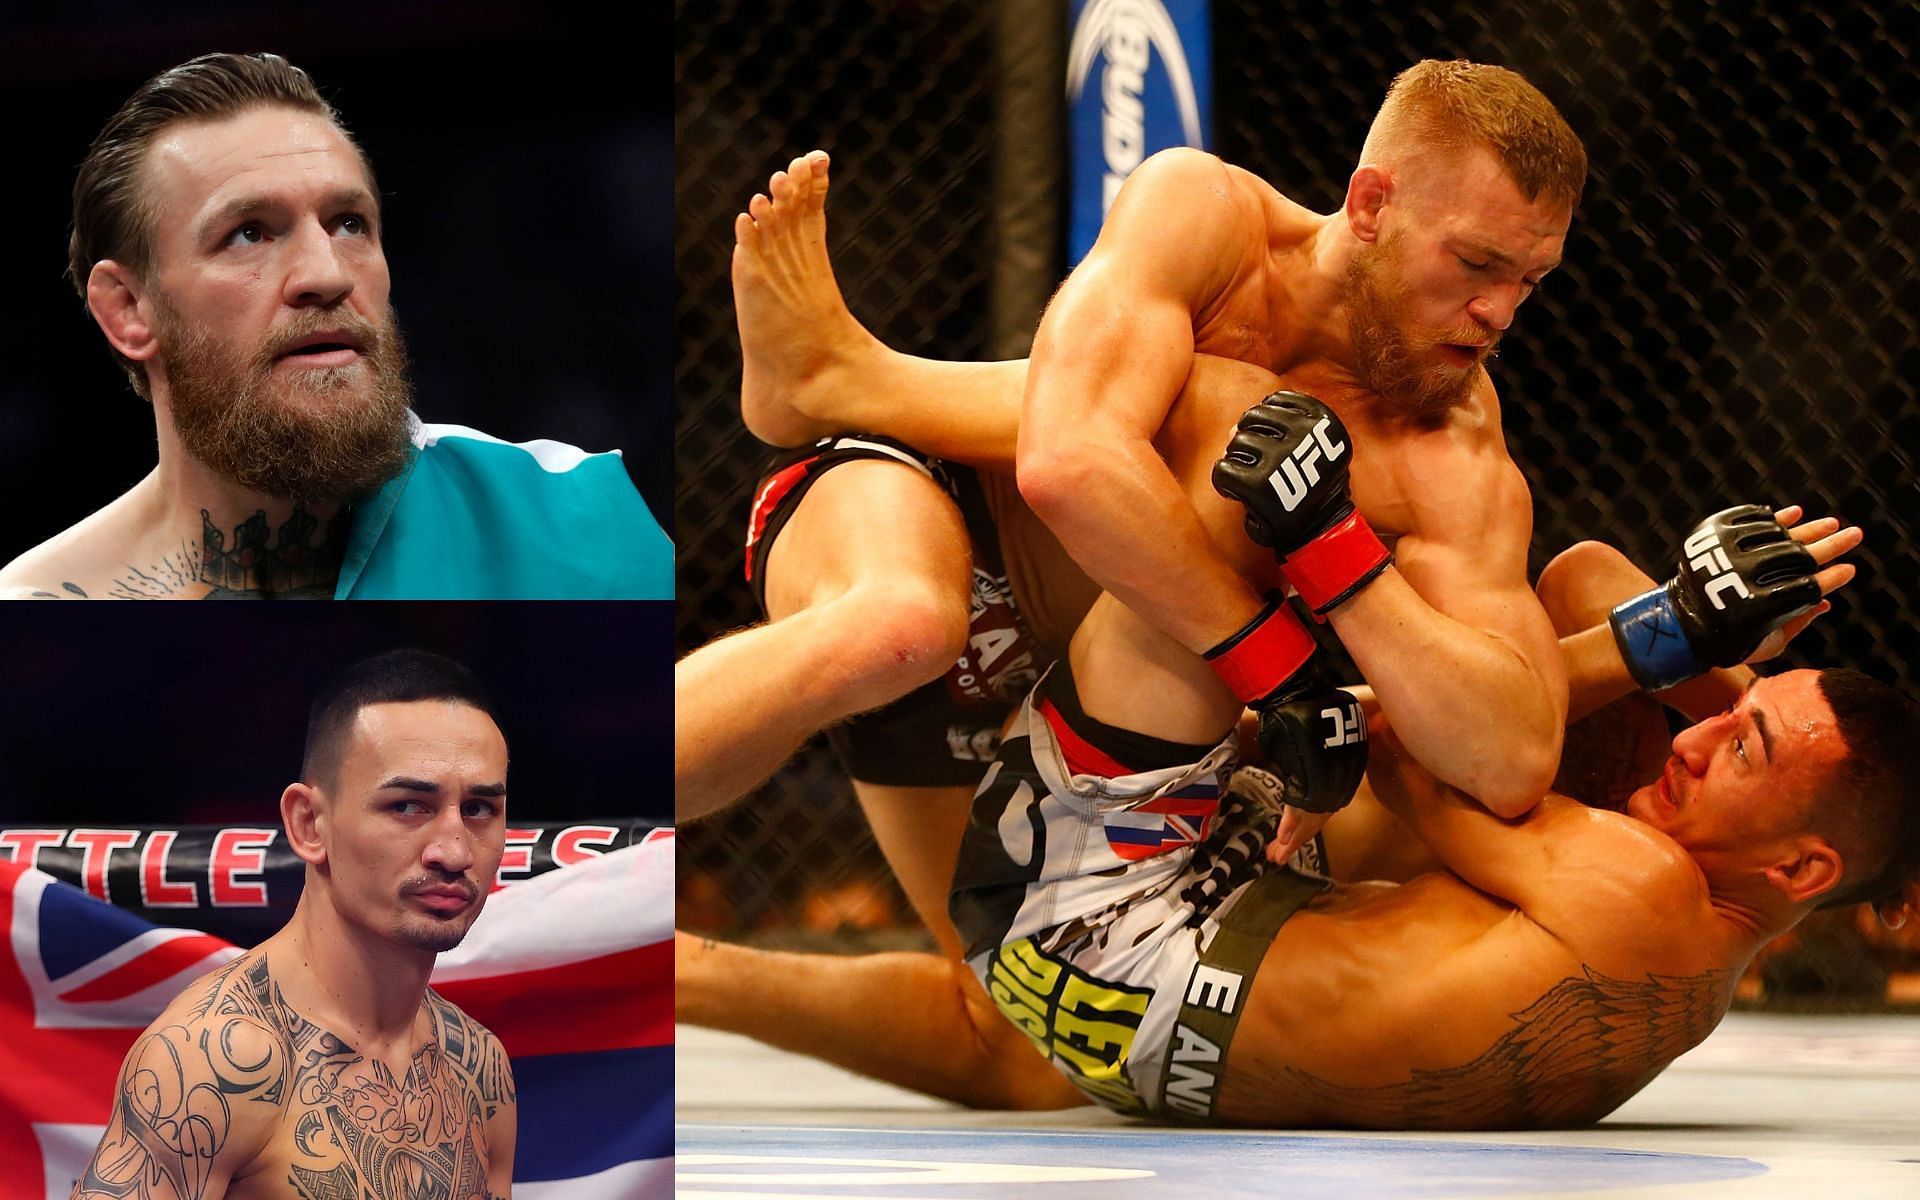 Max Holloway (bottom left) recollects off-camera interaction with Conor McGregor (top left) amid callouts